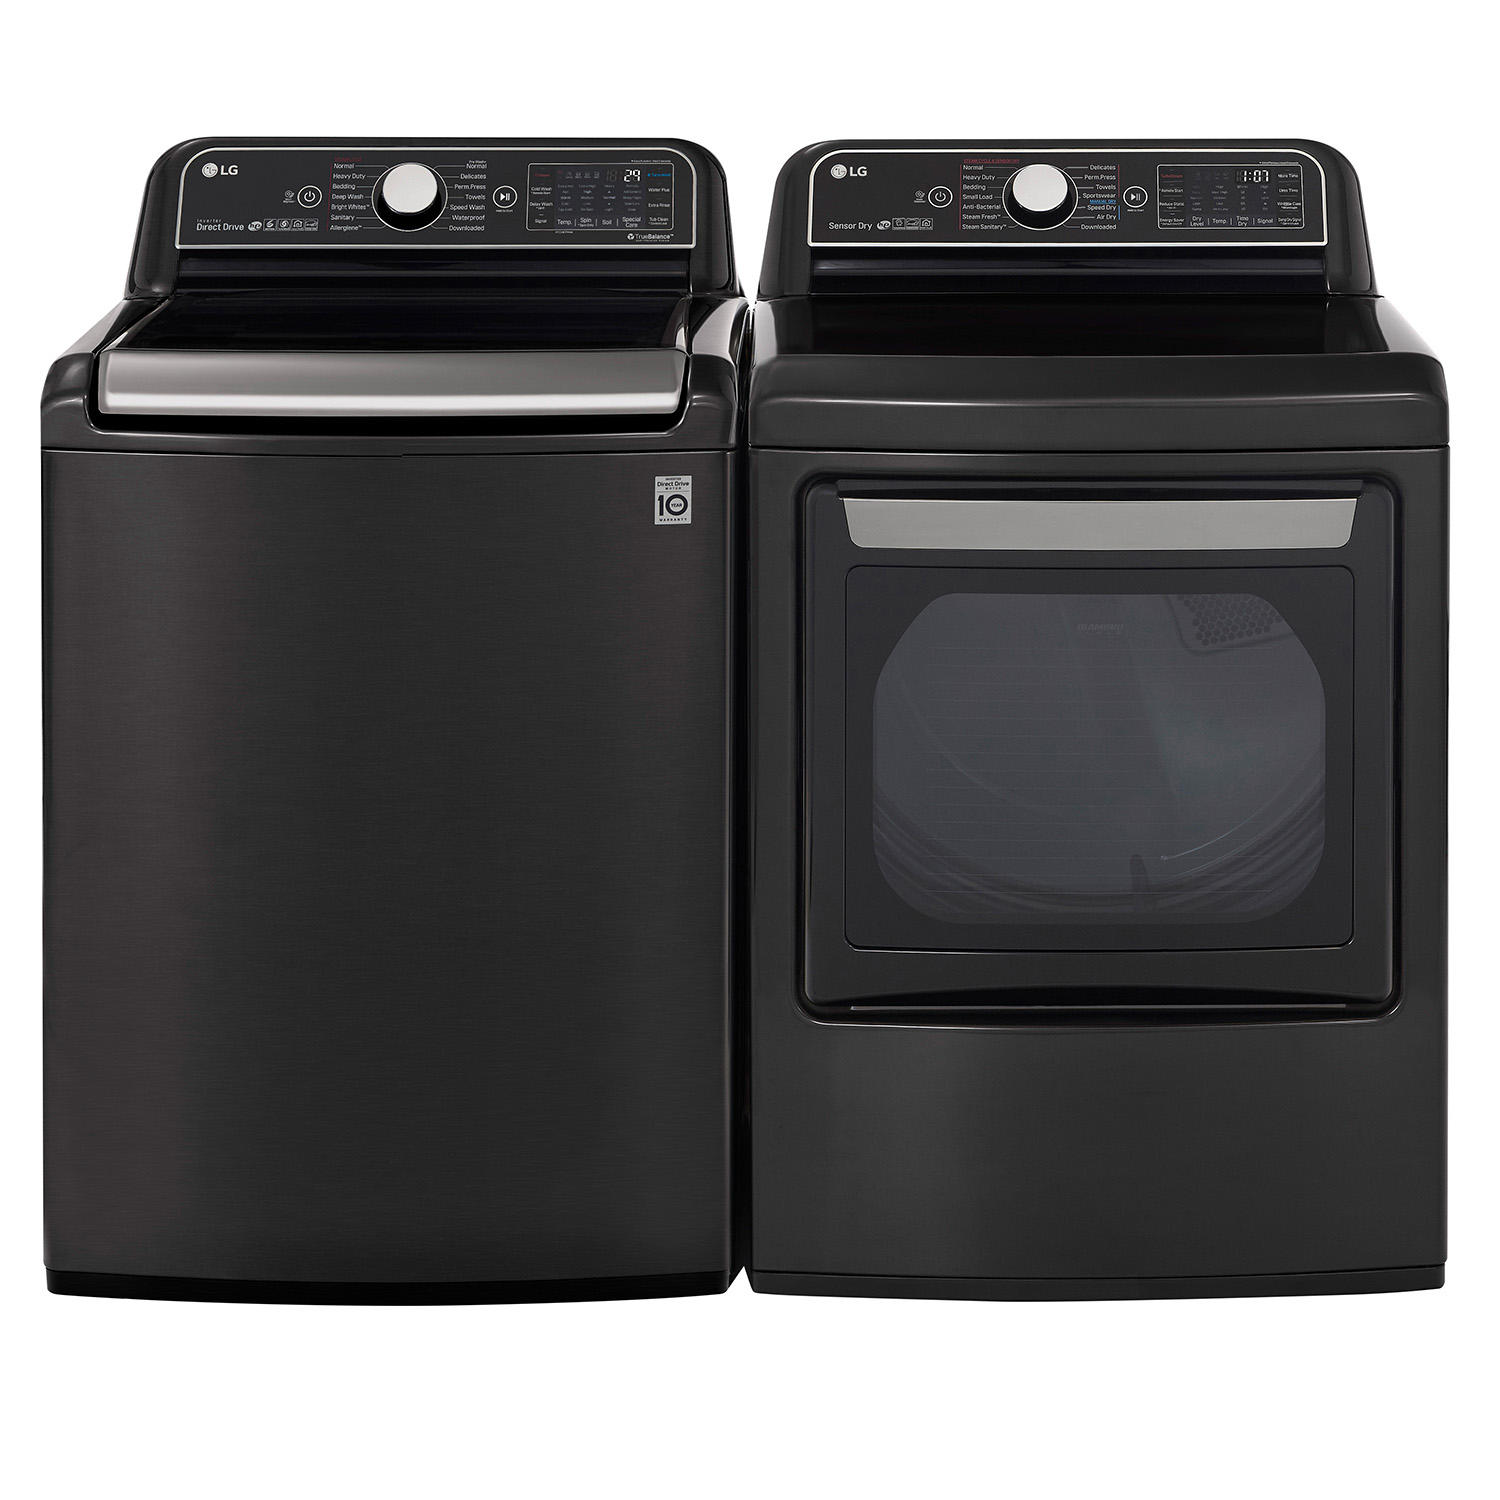 LG 5.5 cu.ft. Top Load Washer + LG 7.3 cu. ft. Dryer in Black Stainless Steel Finish